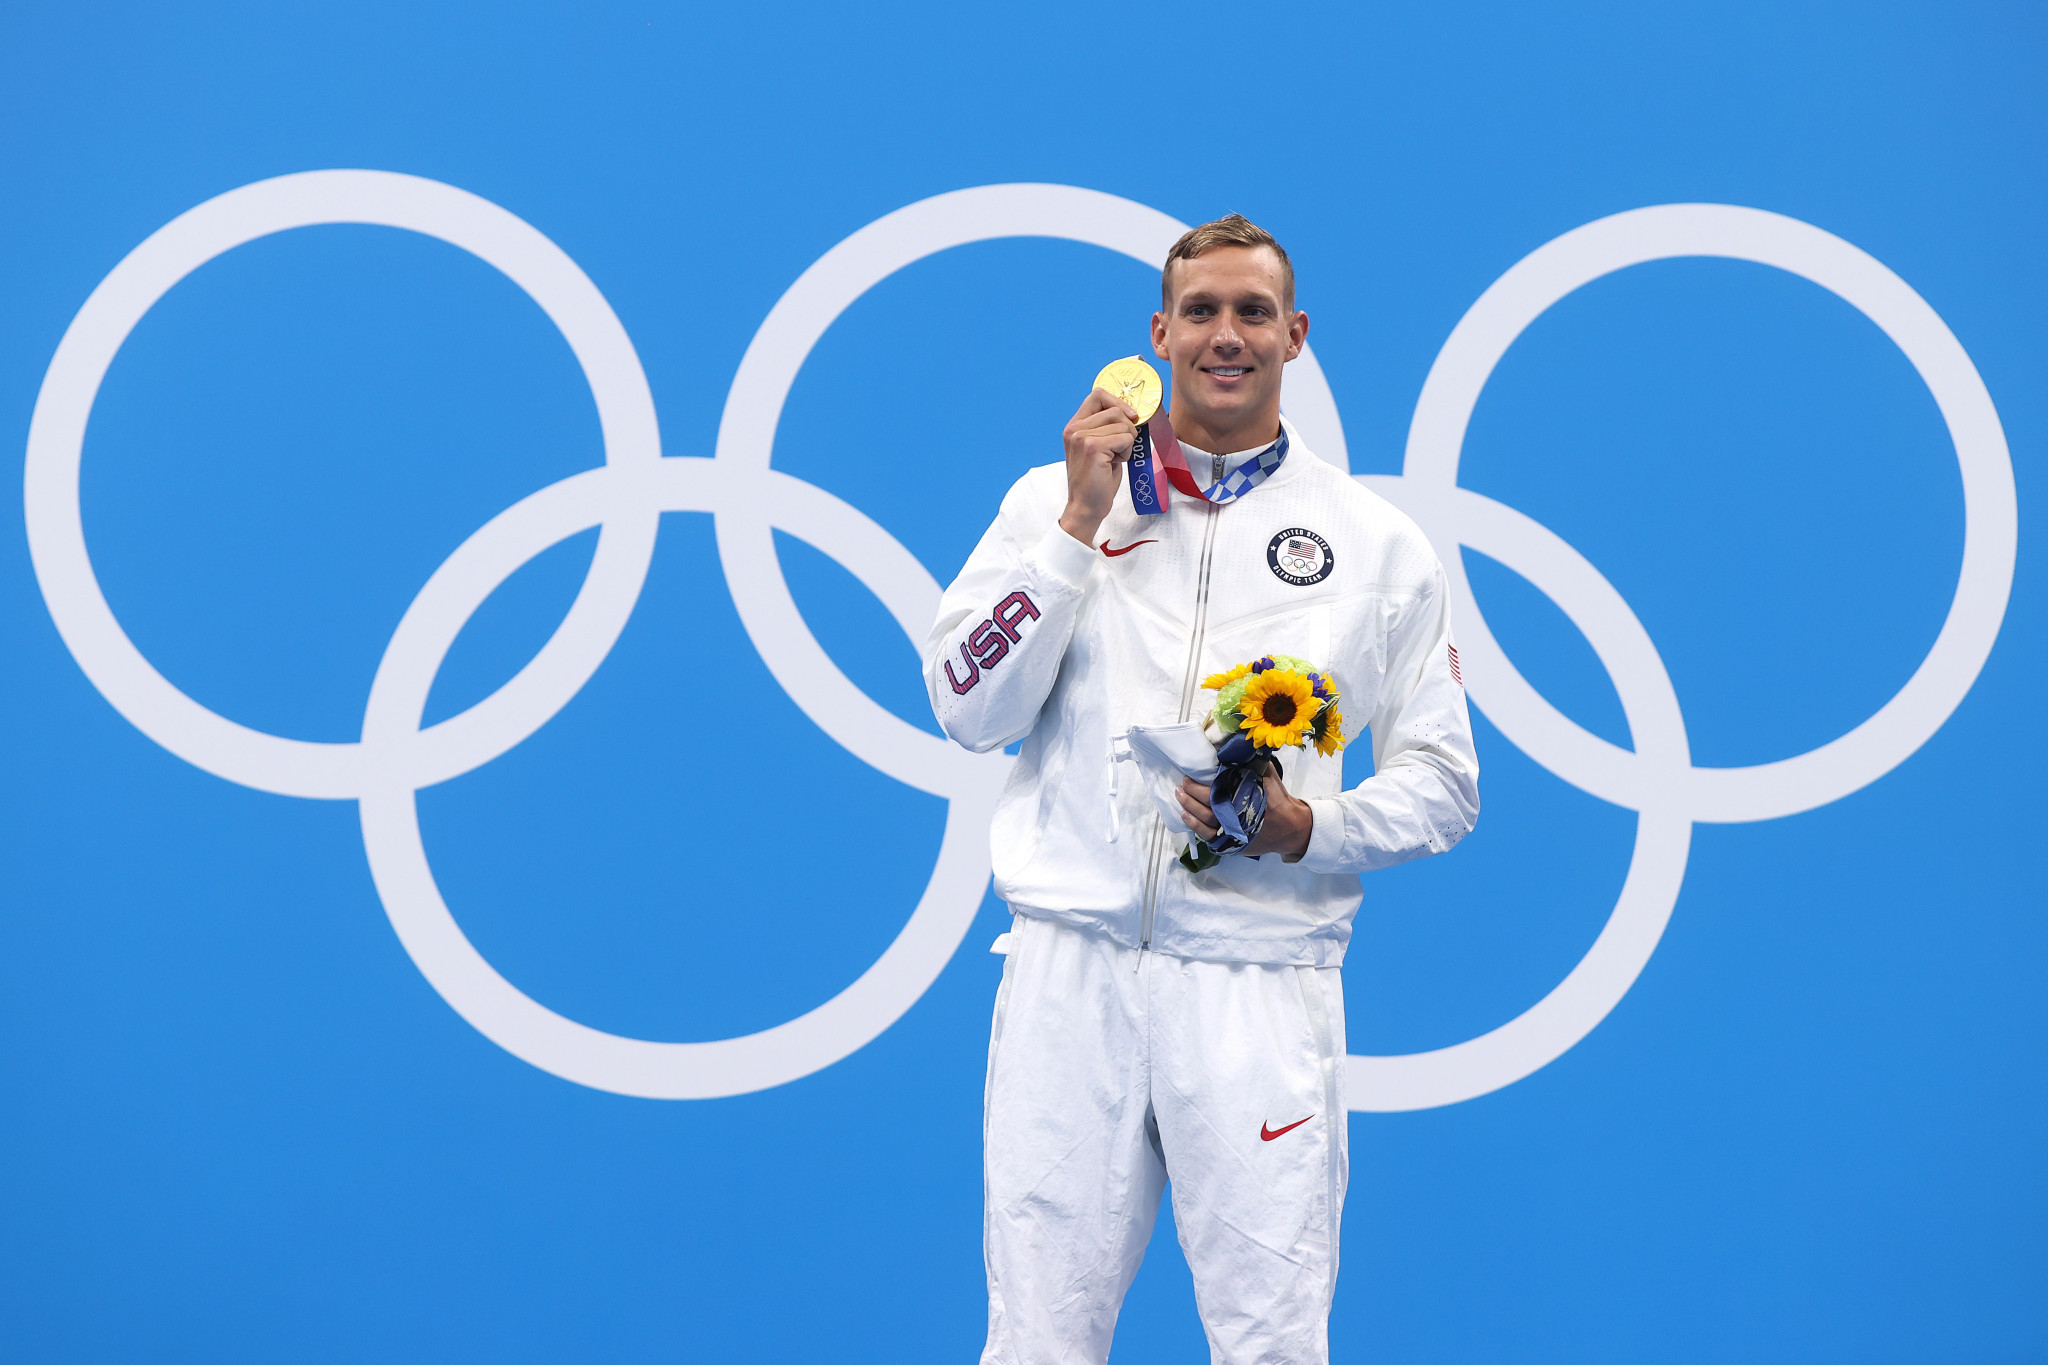 American swimmer Caeleb Dressel won five gold medals at Tokyo 2020 and says athletes feeling stress is wrong ©Getty Images